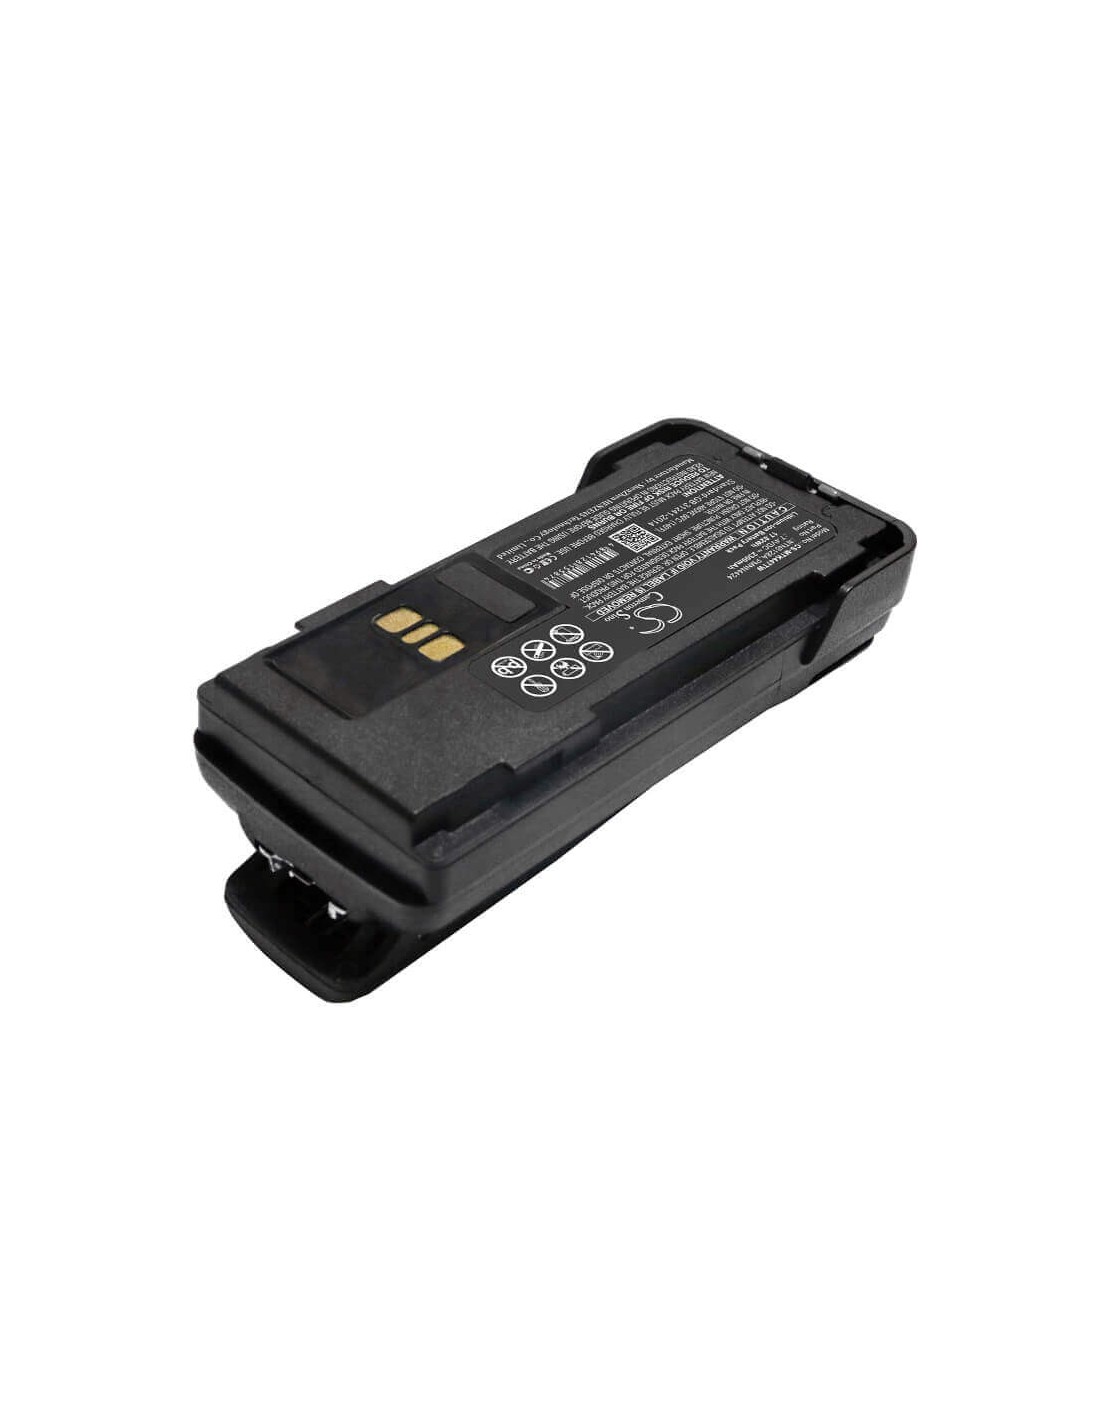 Battery for Motorola, Apx2000, Apx-2000, Apx3000 7.4V, 2300mAh - 17.02Wh